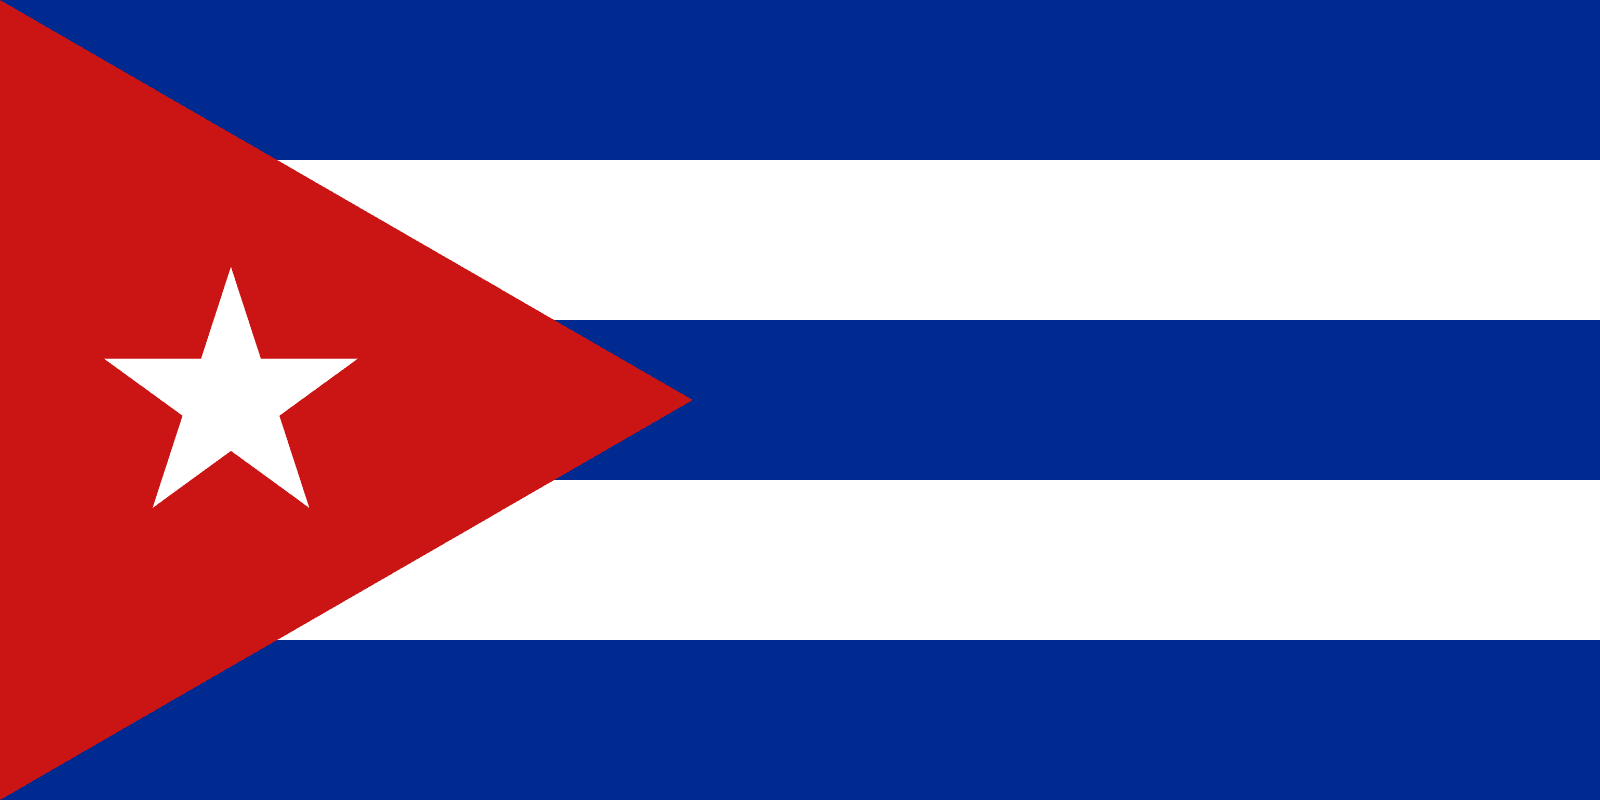 Bandera Cuba Desk Flag 4"x 6" inches Order With or Without Stand 